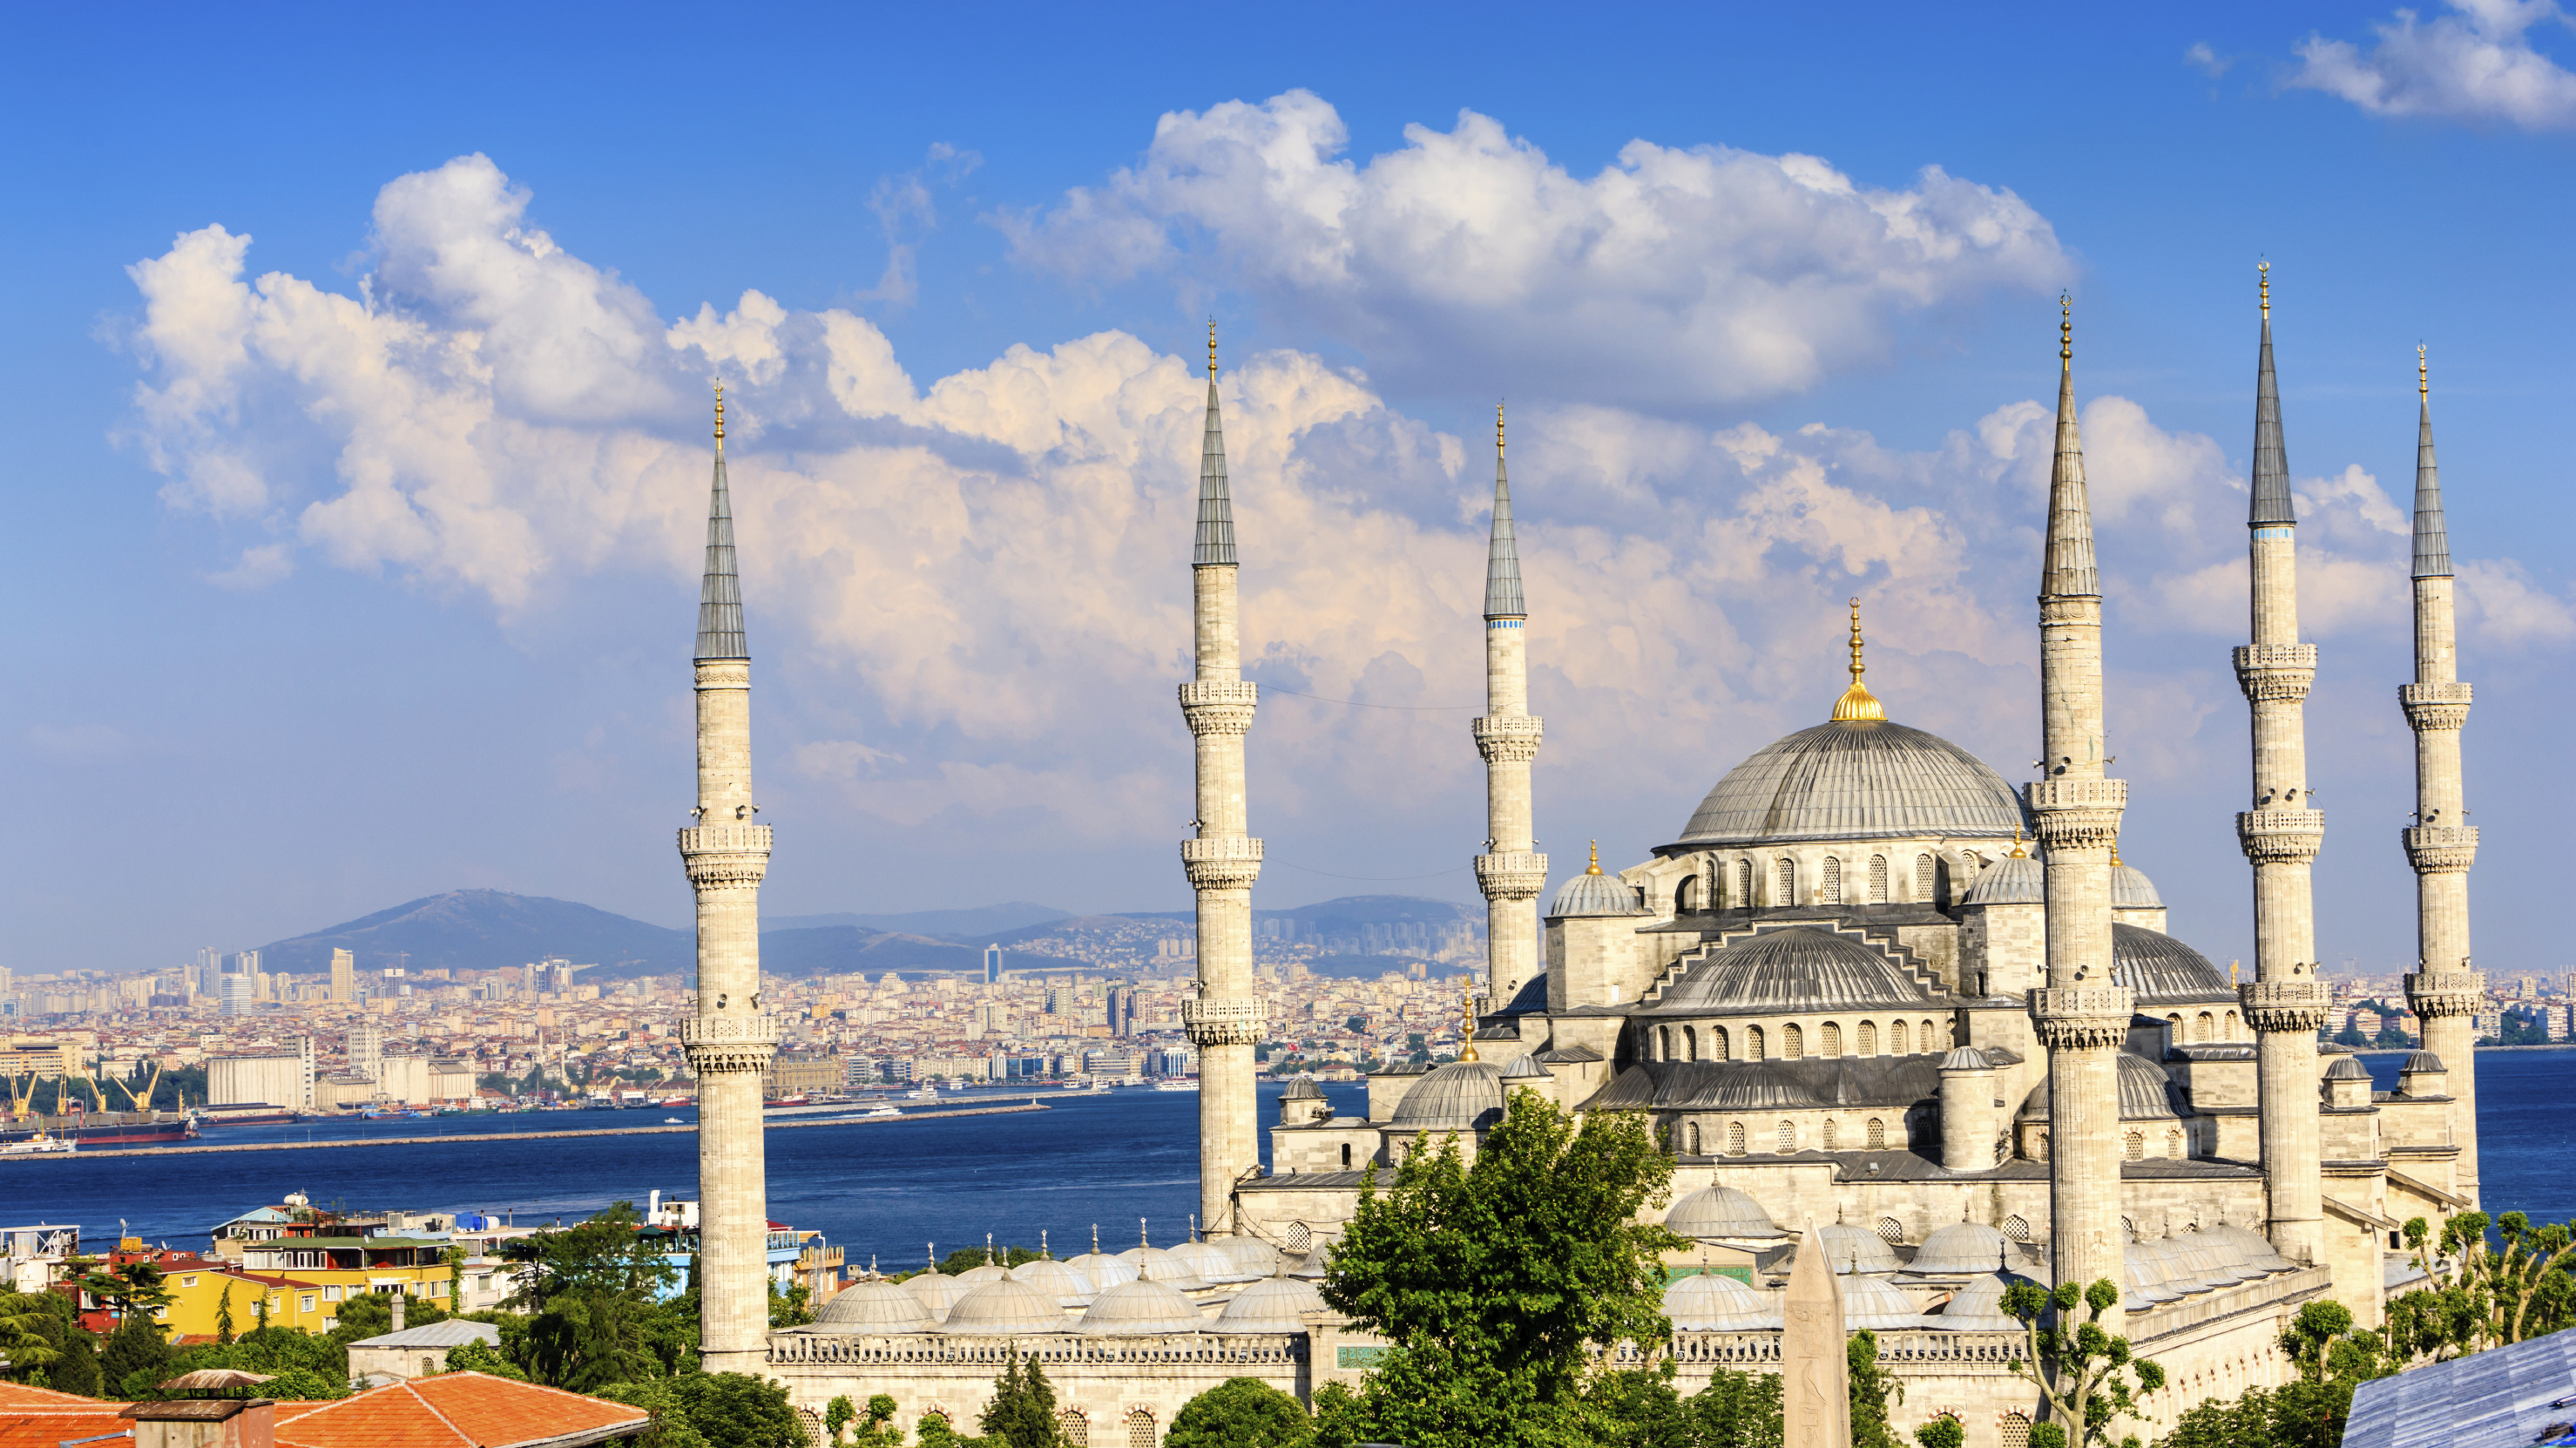 Sultan Ahmed Mosque, Religious, HQ Pictures, 4K Wallpapers, 2960x1670 HD Desktop